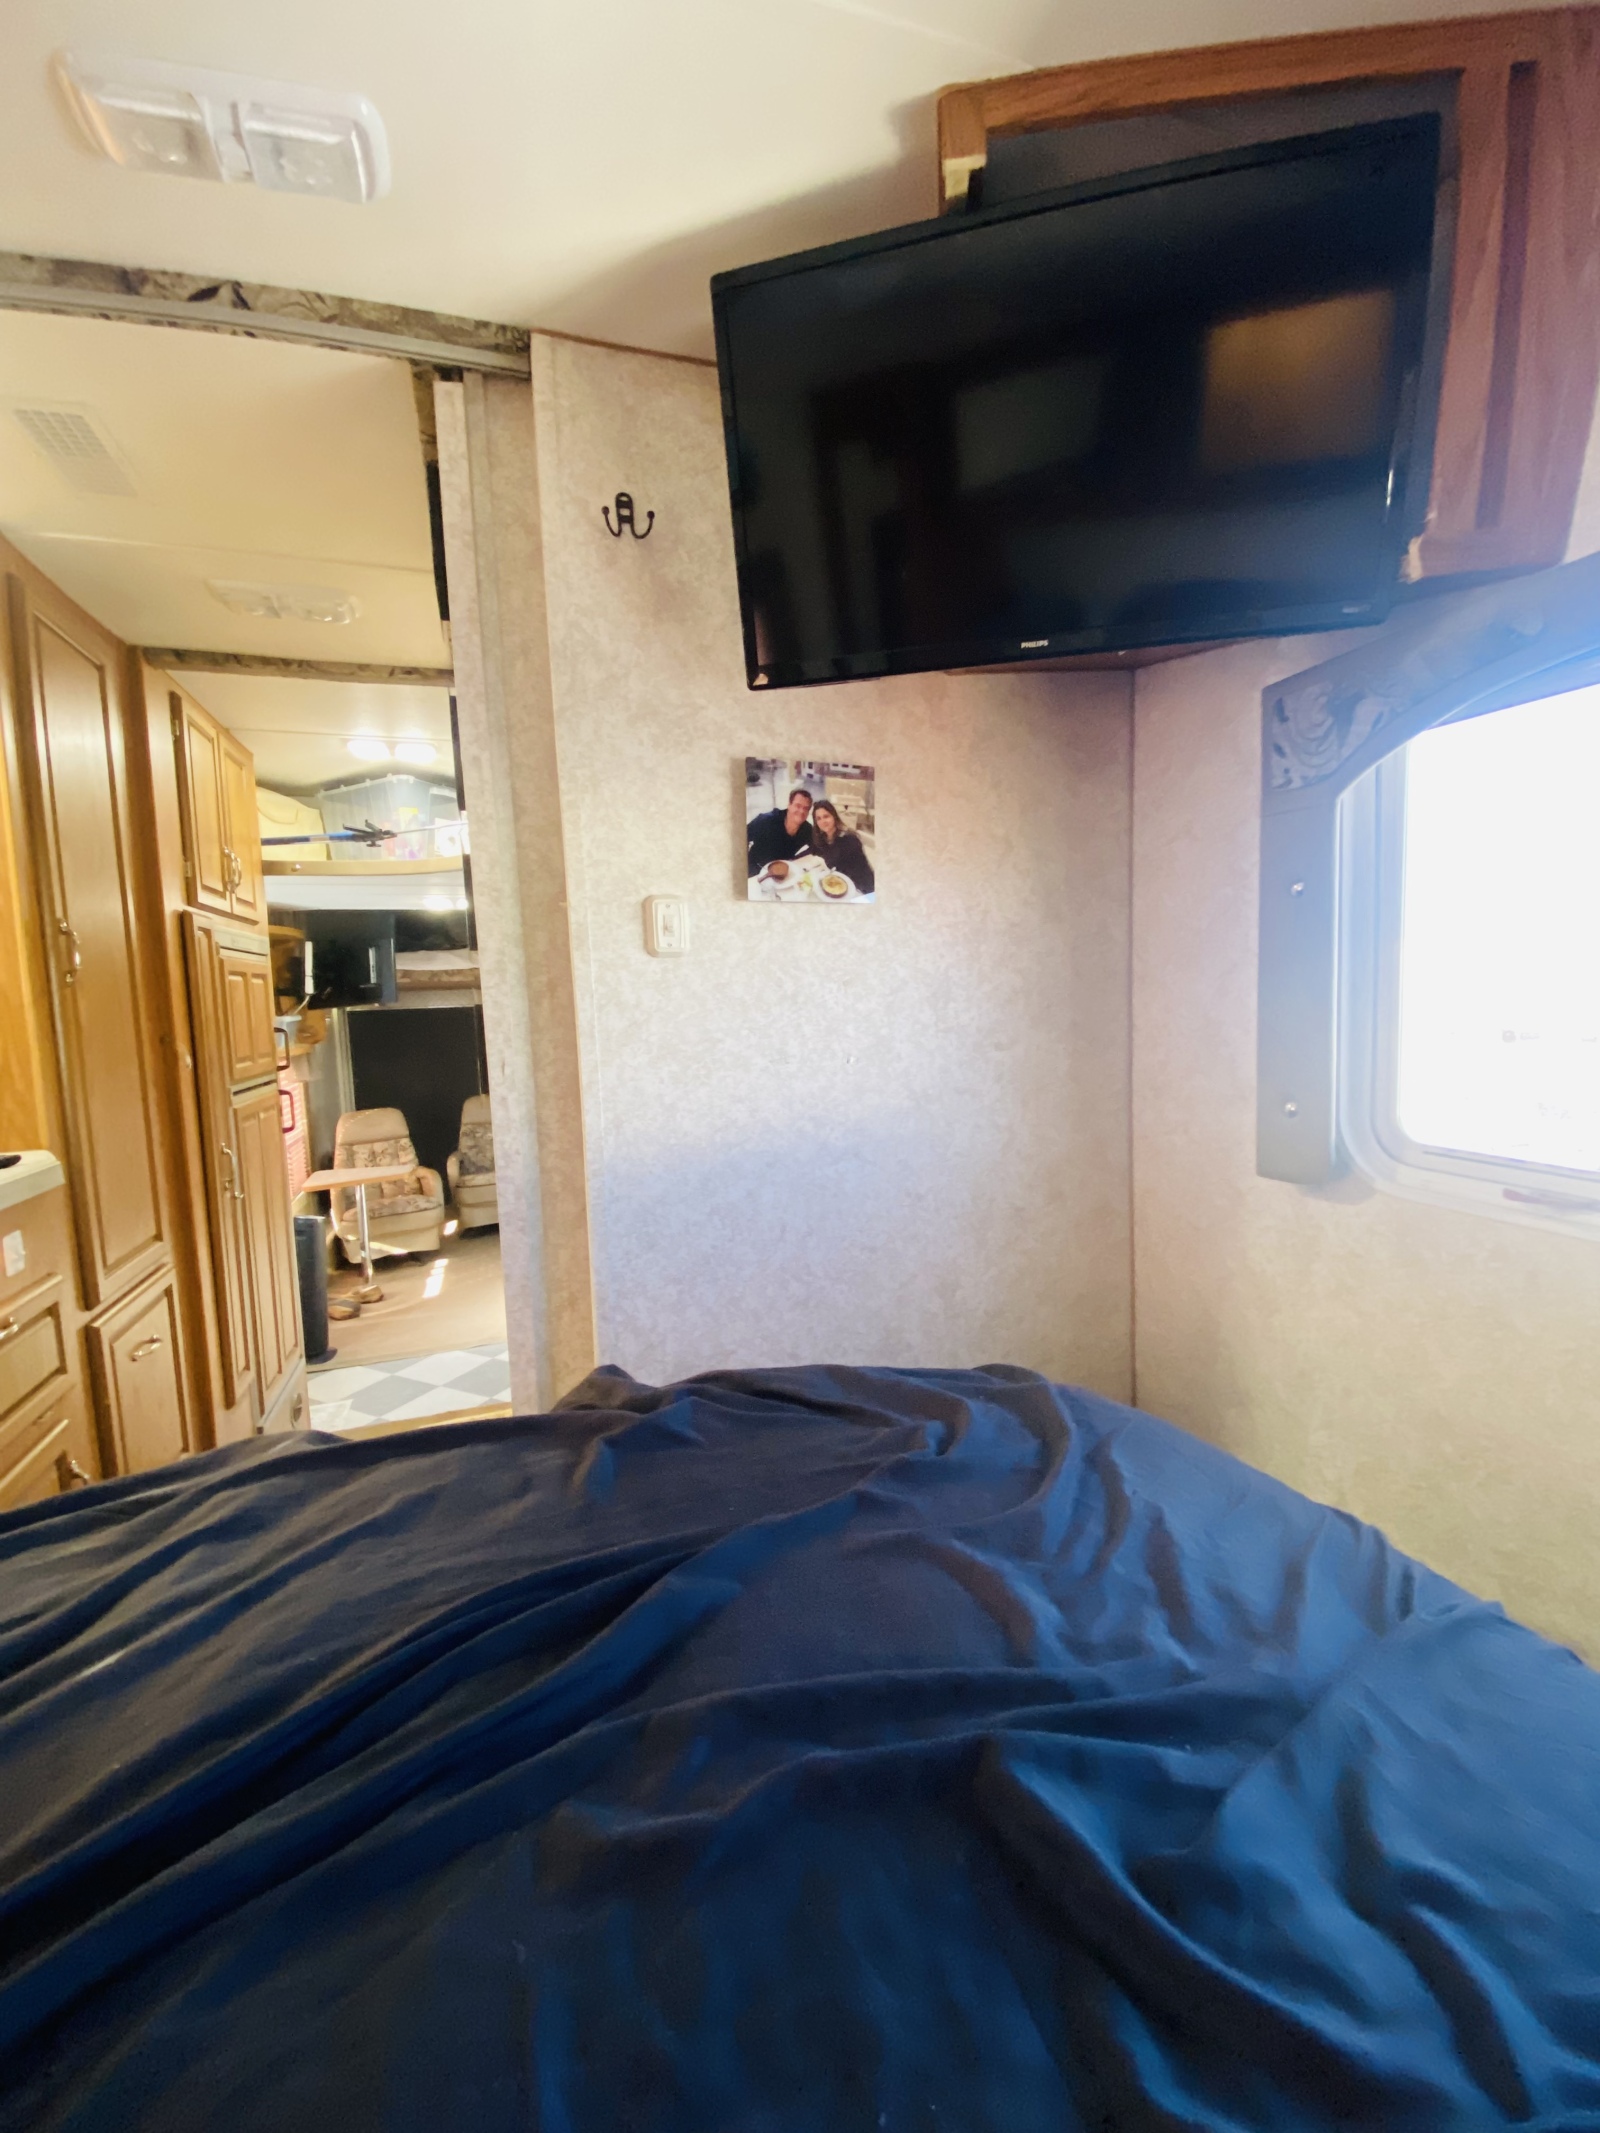 For Sale: 2007 Weekend Warrior LE3105 Toy Hauler - photo7